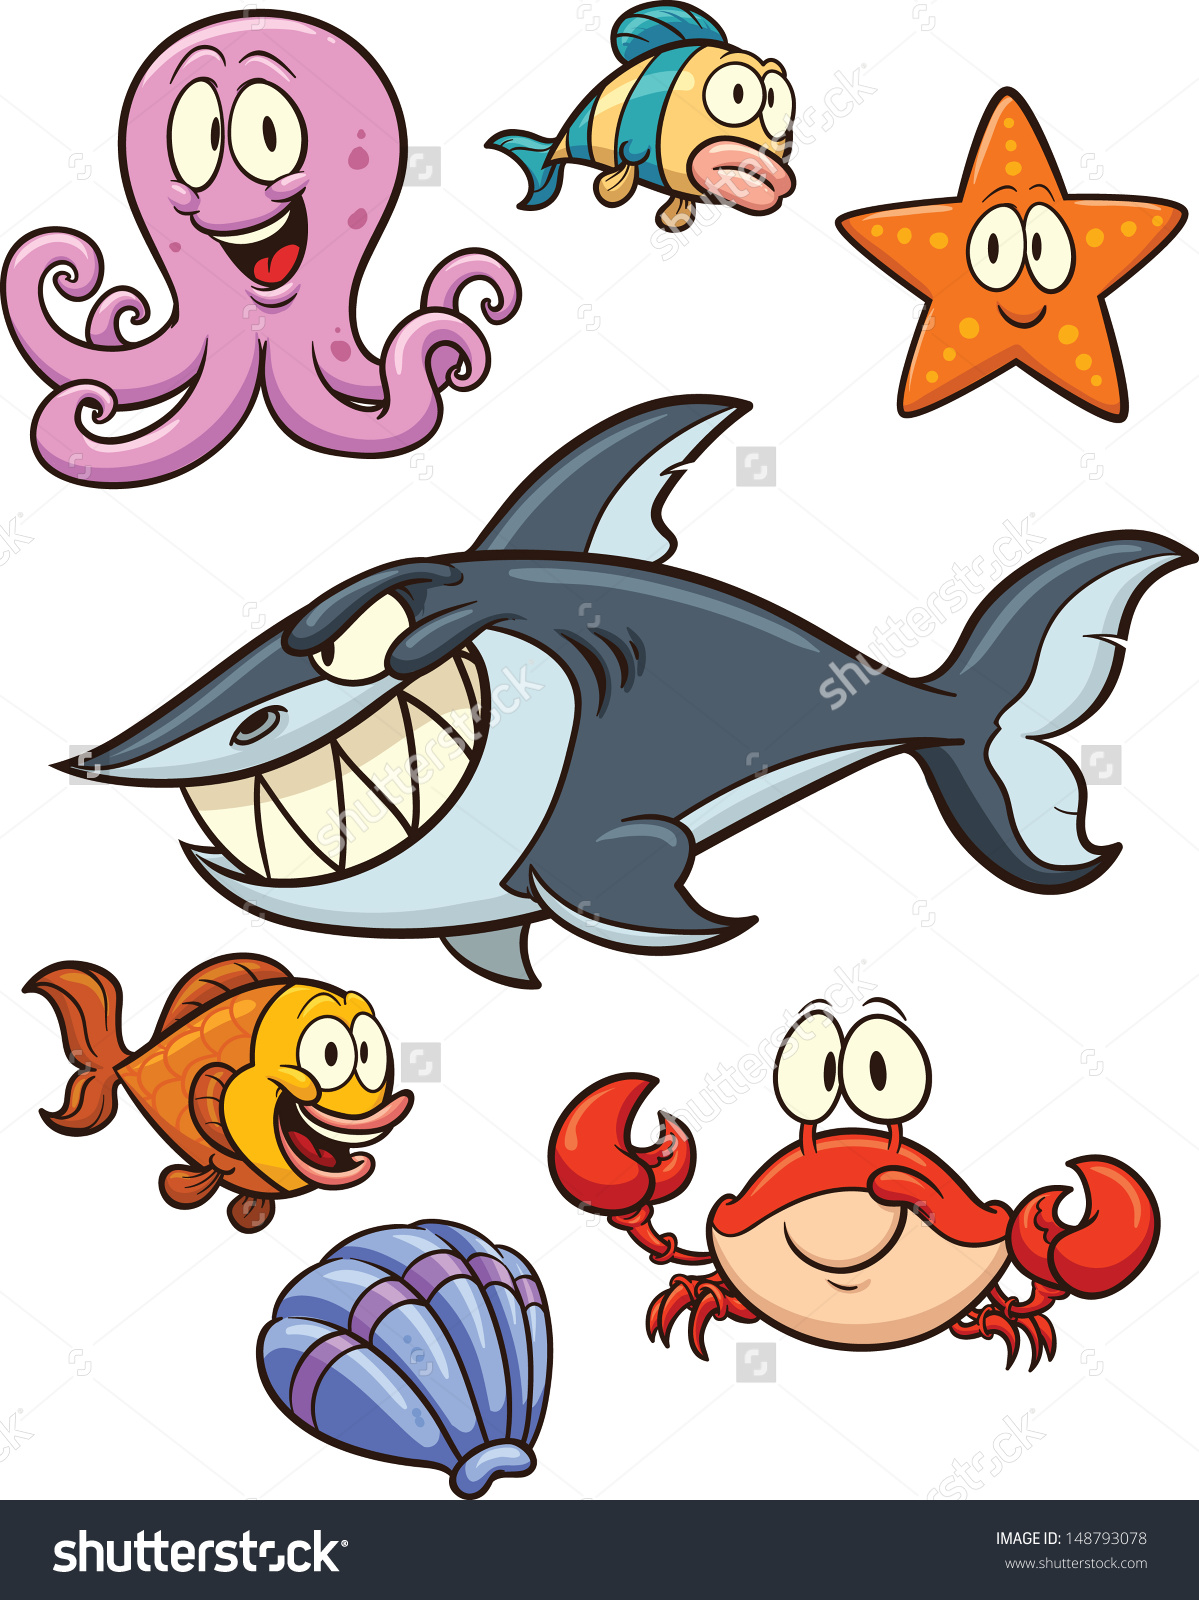 Creatures clipart - Clipground